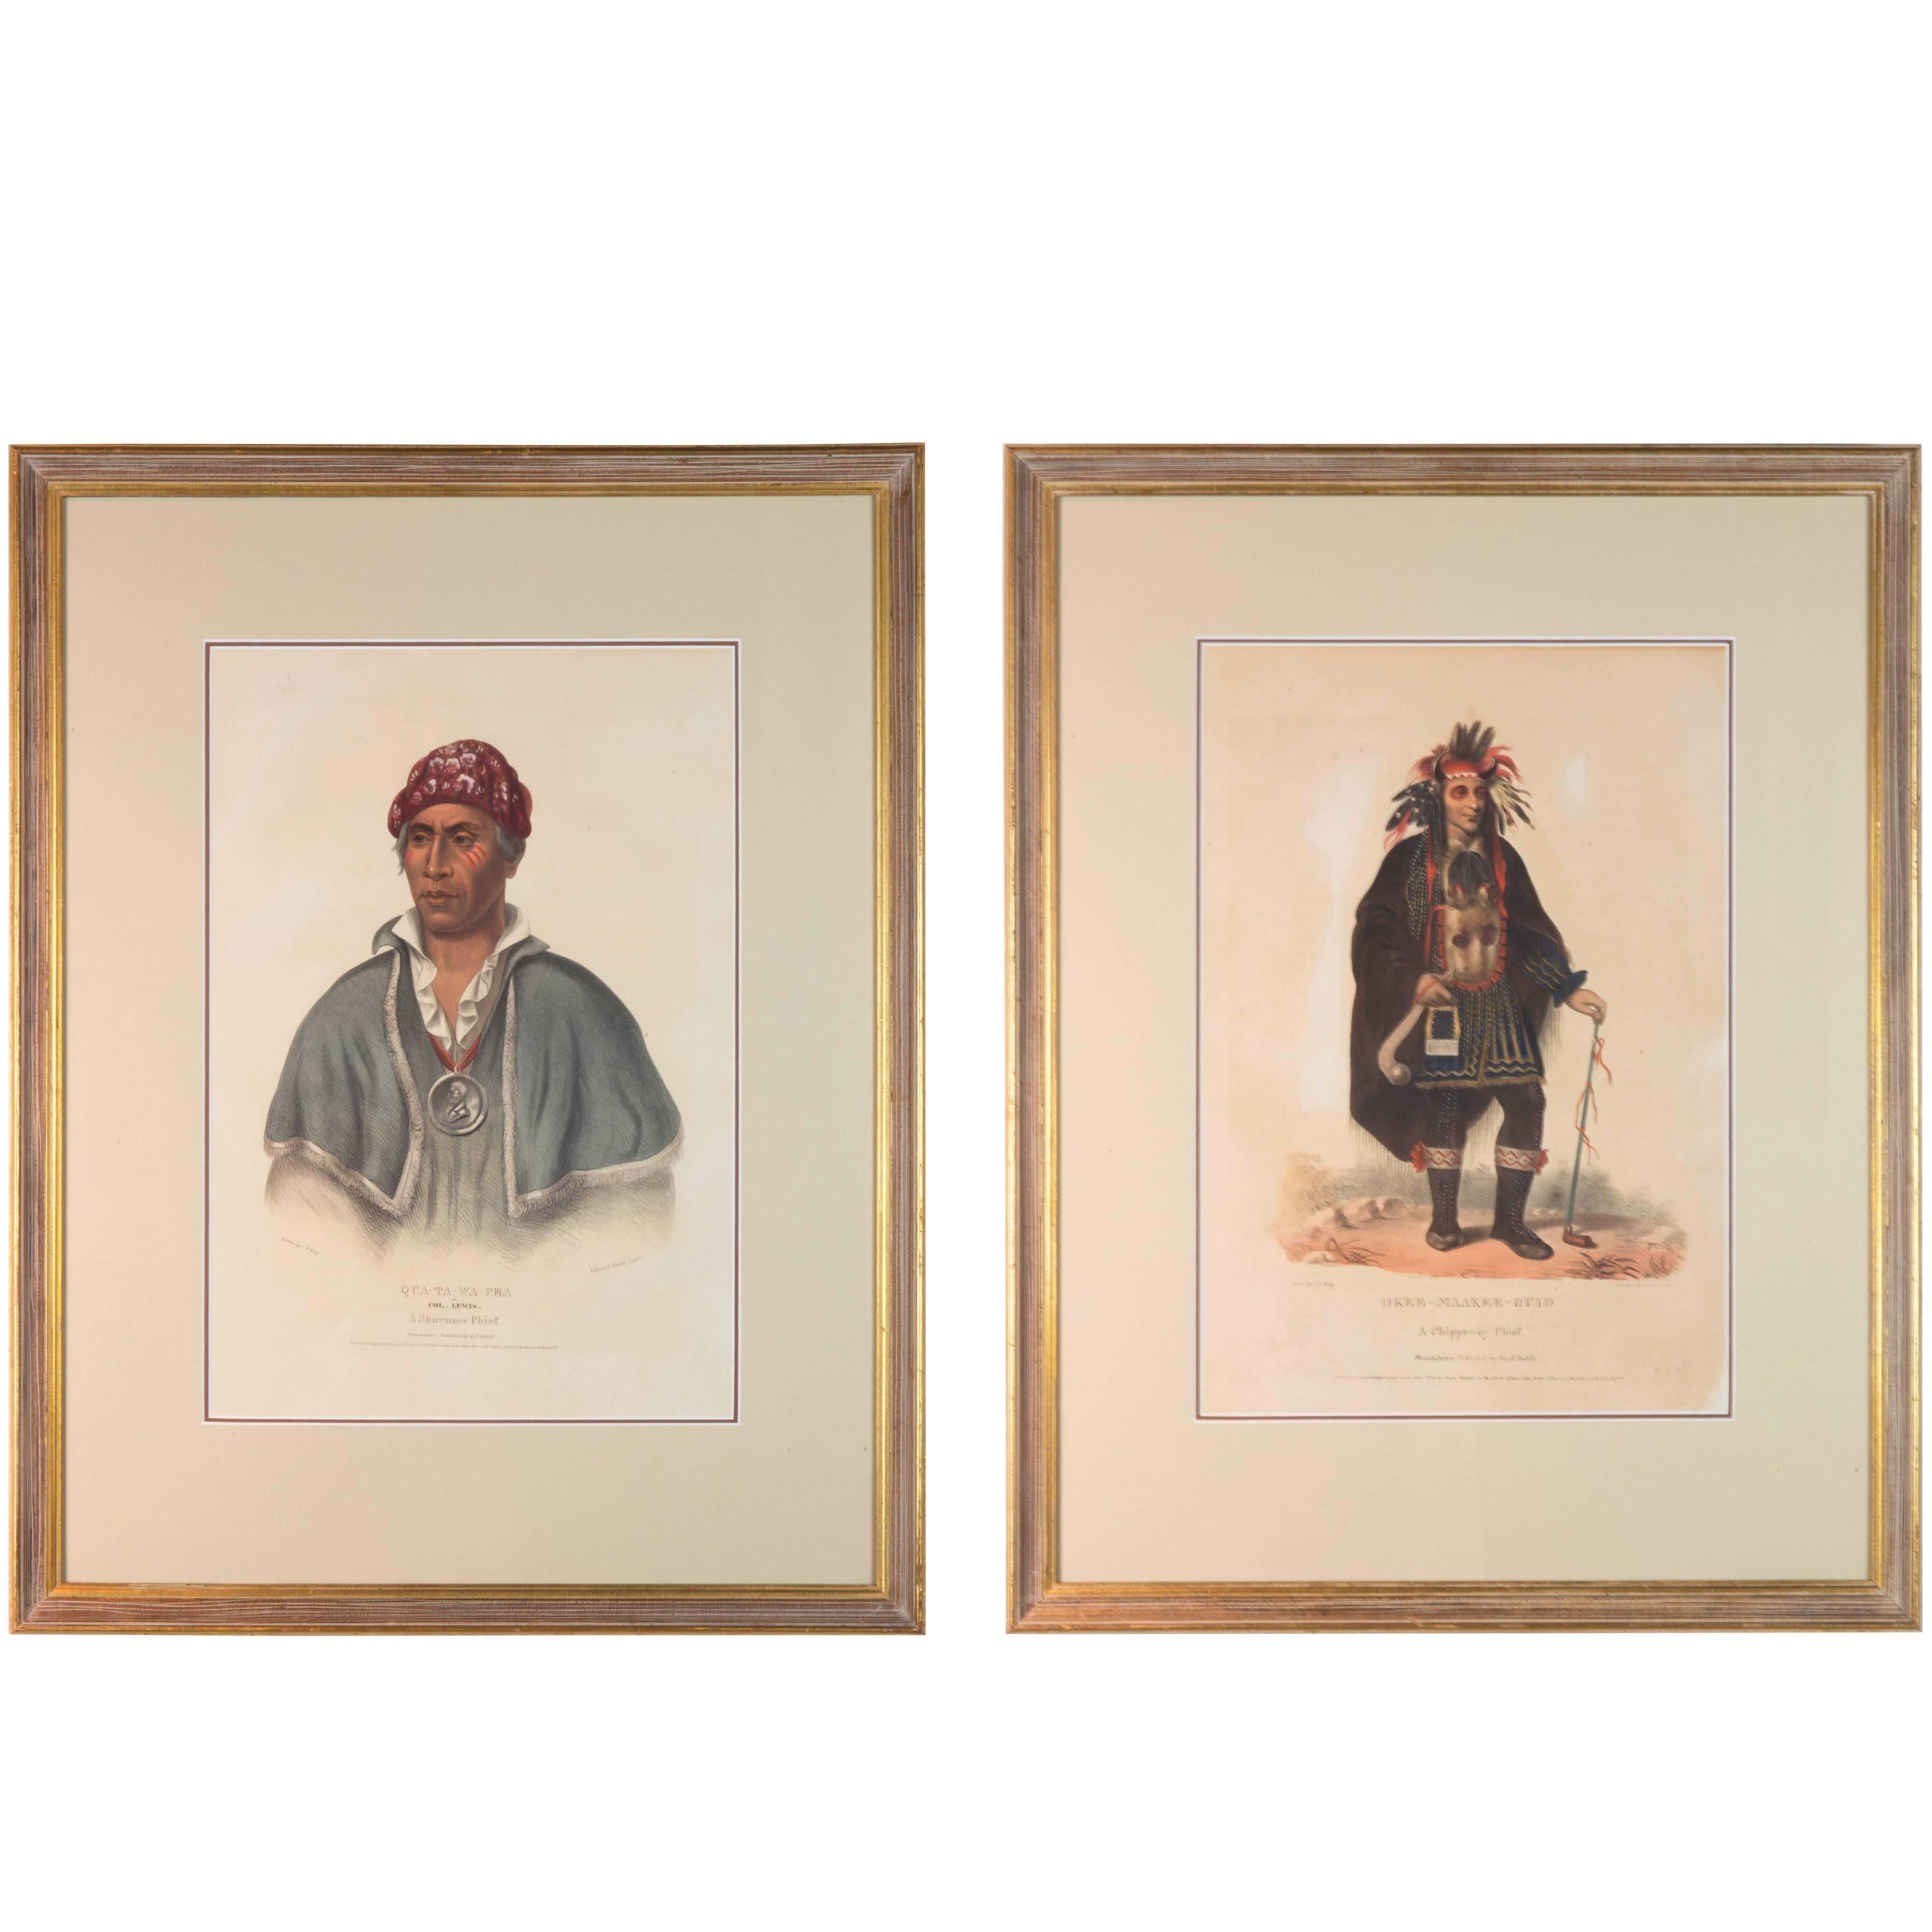 Pair of Original Hand Colored McKenney & Hall Lithographs of American Indians